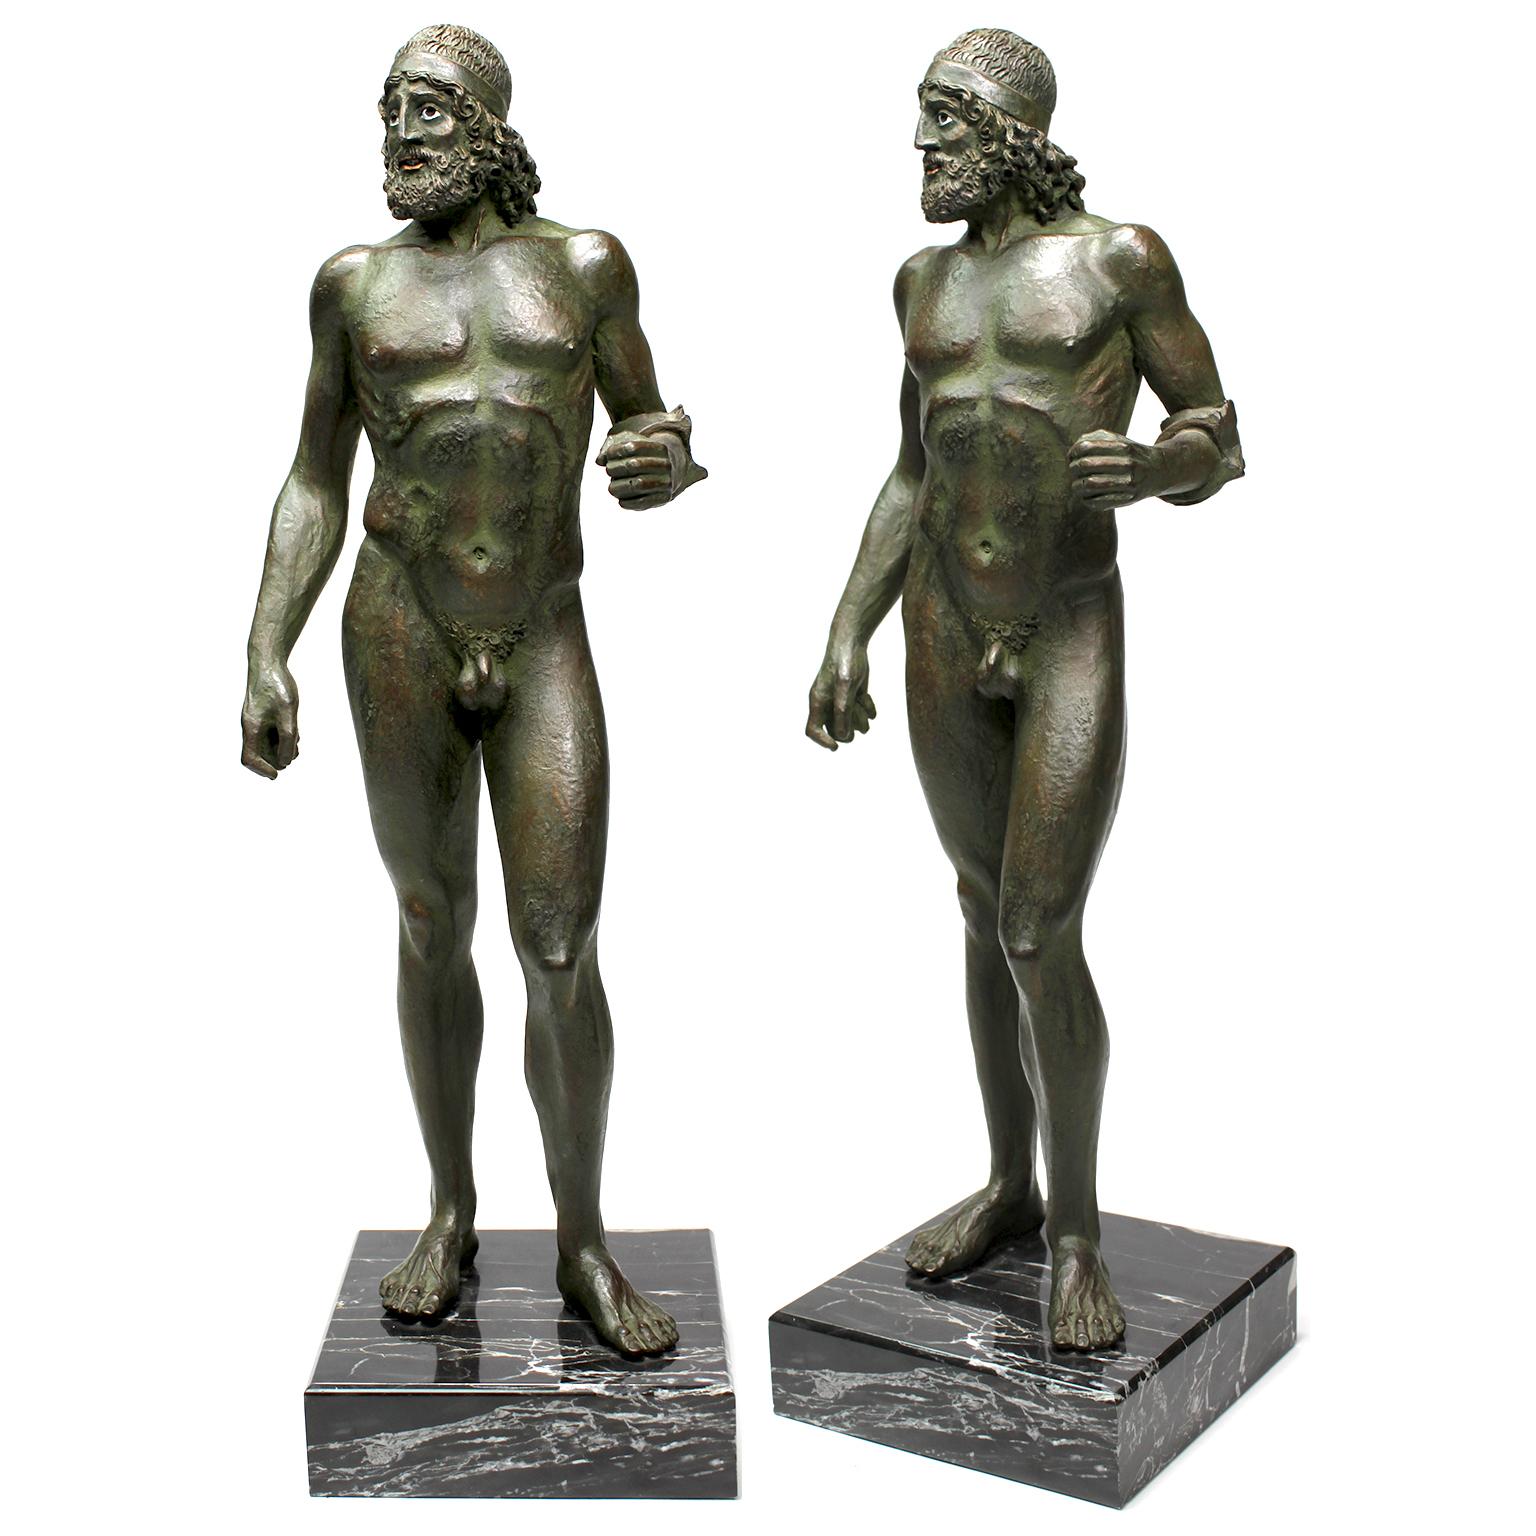 The Riace Warriors, a fine pair of cold cast copper and resin figures of the Riace Warriors, reduced replicas of the original bronze sculptures currently located at the Museo Nazionale della Magna Grecia in the southern Italian city of Reggio